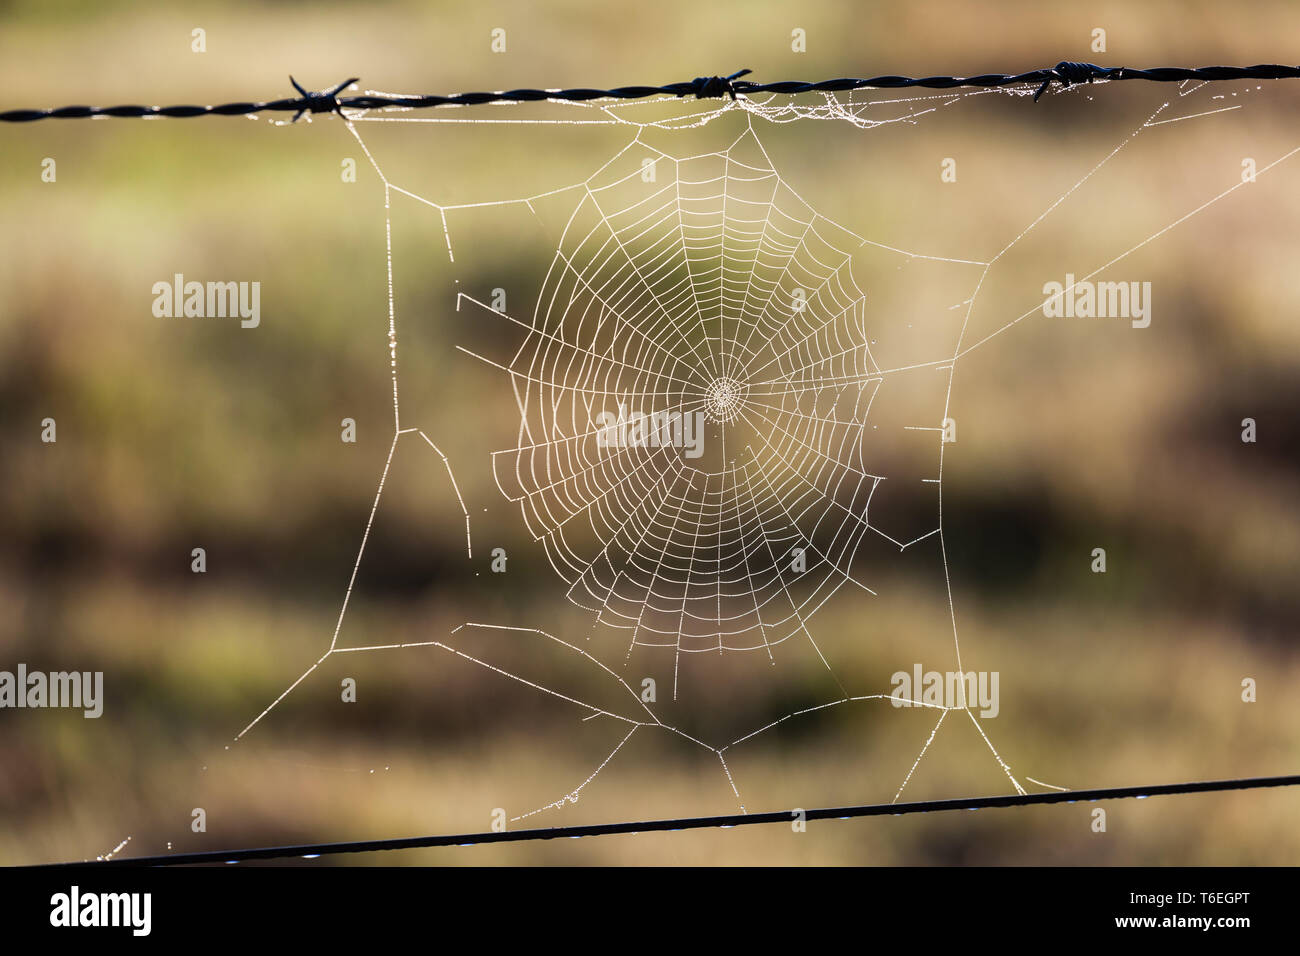 Cobweb on barbed wire fence on blurred background Stock Photo